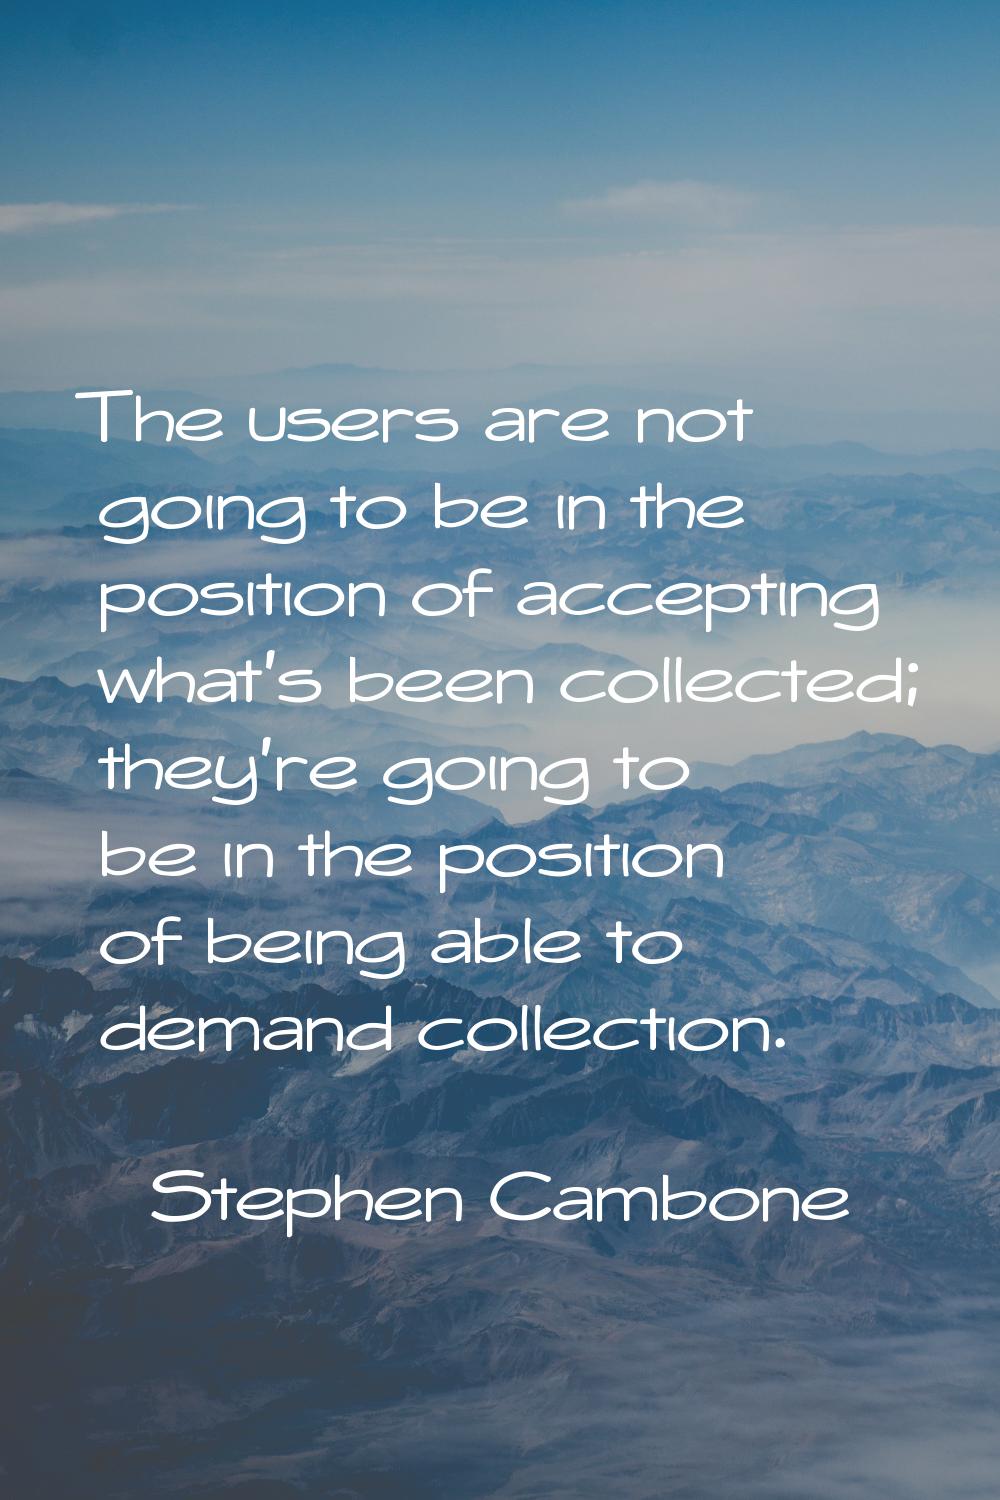 The users are not going to be in the position of accepting what's been collected; they're going to 